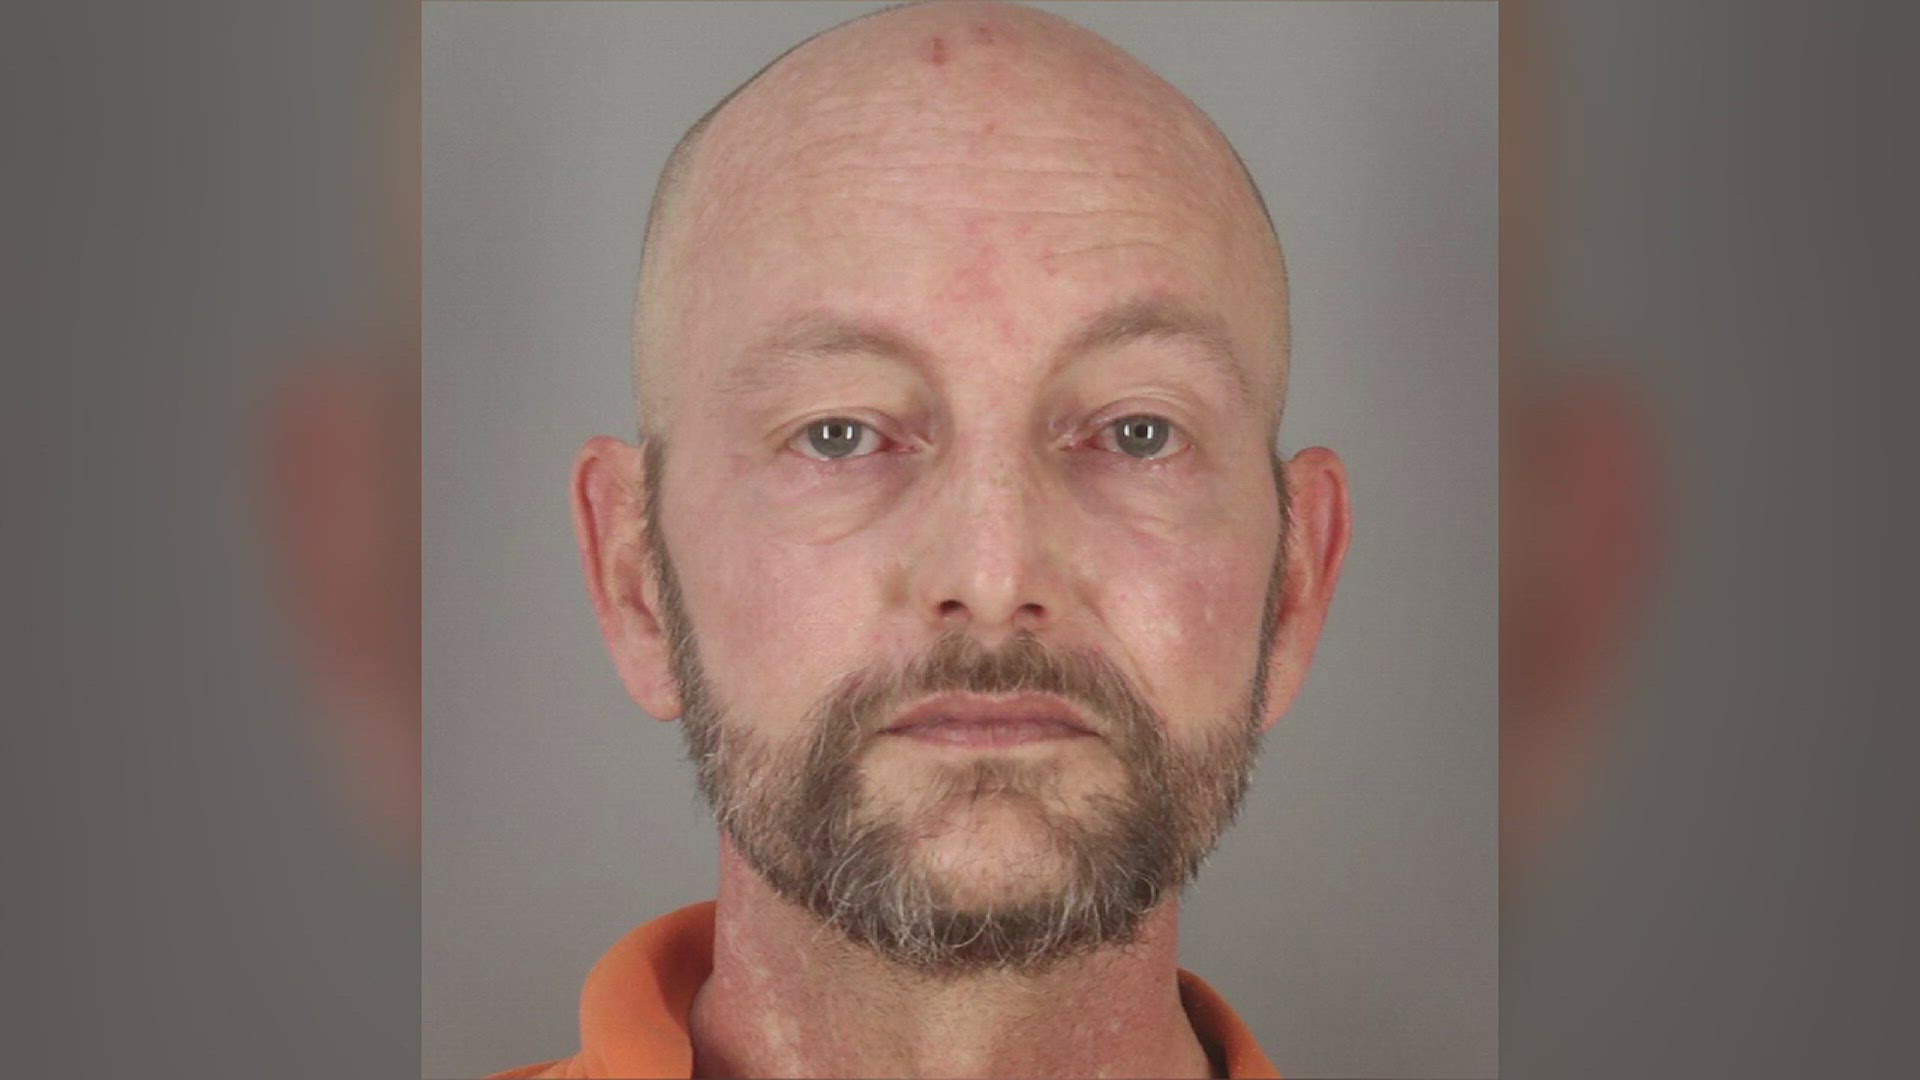 Alan Roy Hartzel, 50, was arrested on February 21, 2020, in connection with the death of Jean Gordan Hartzel, his mother.